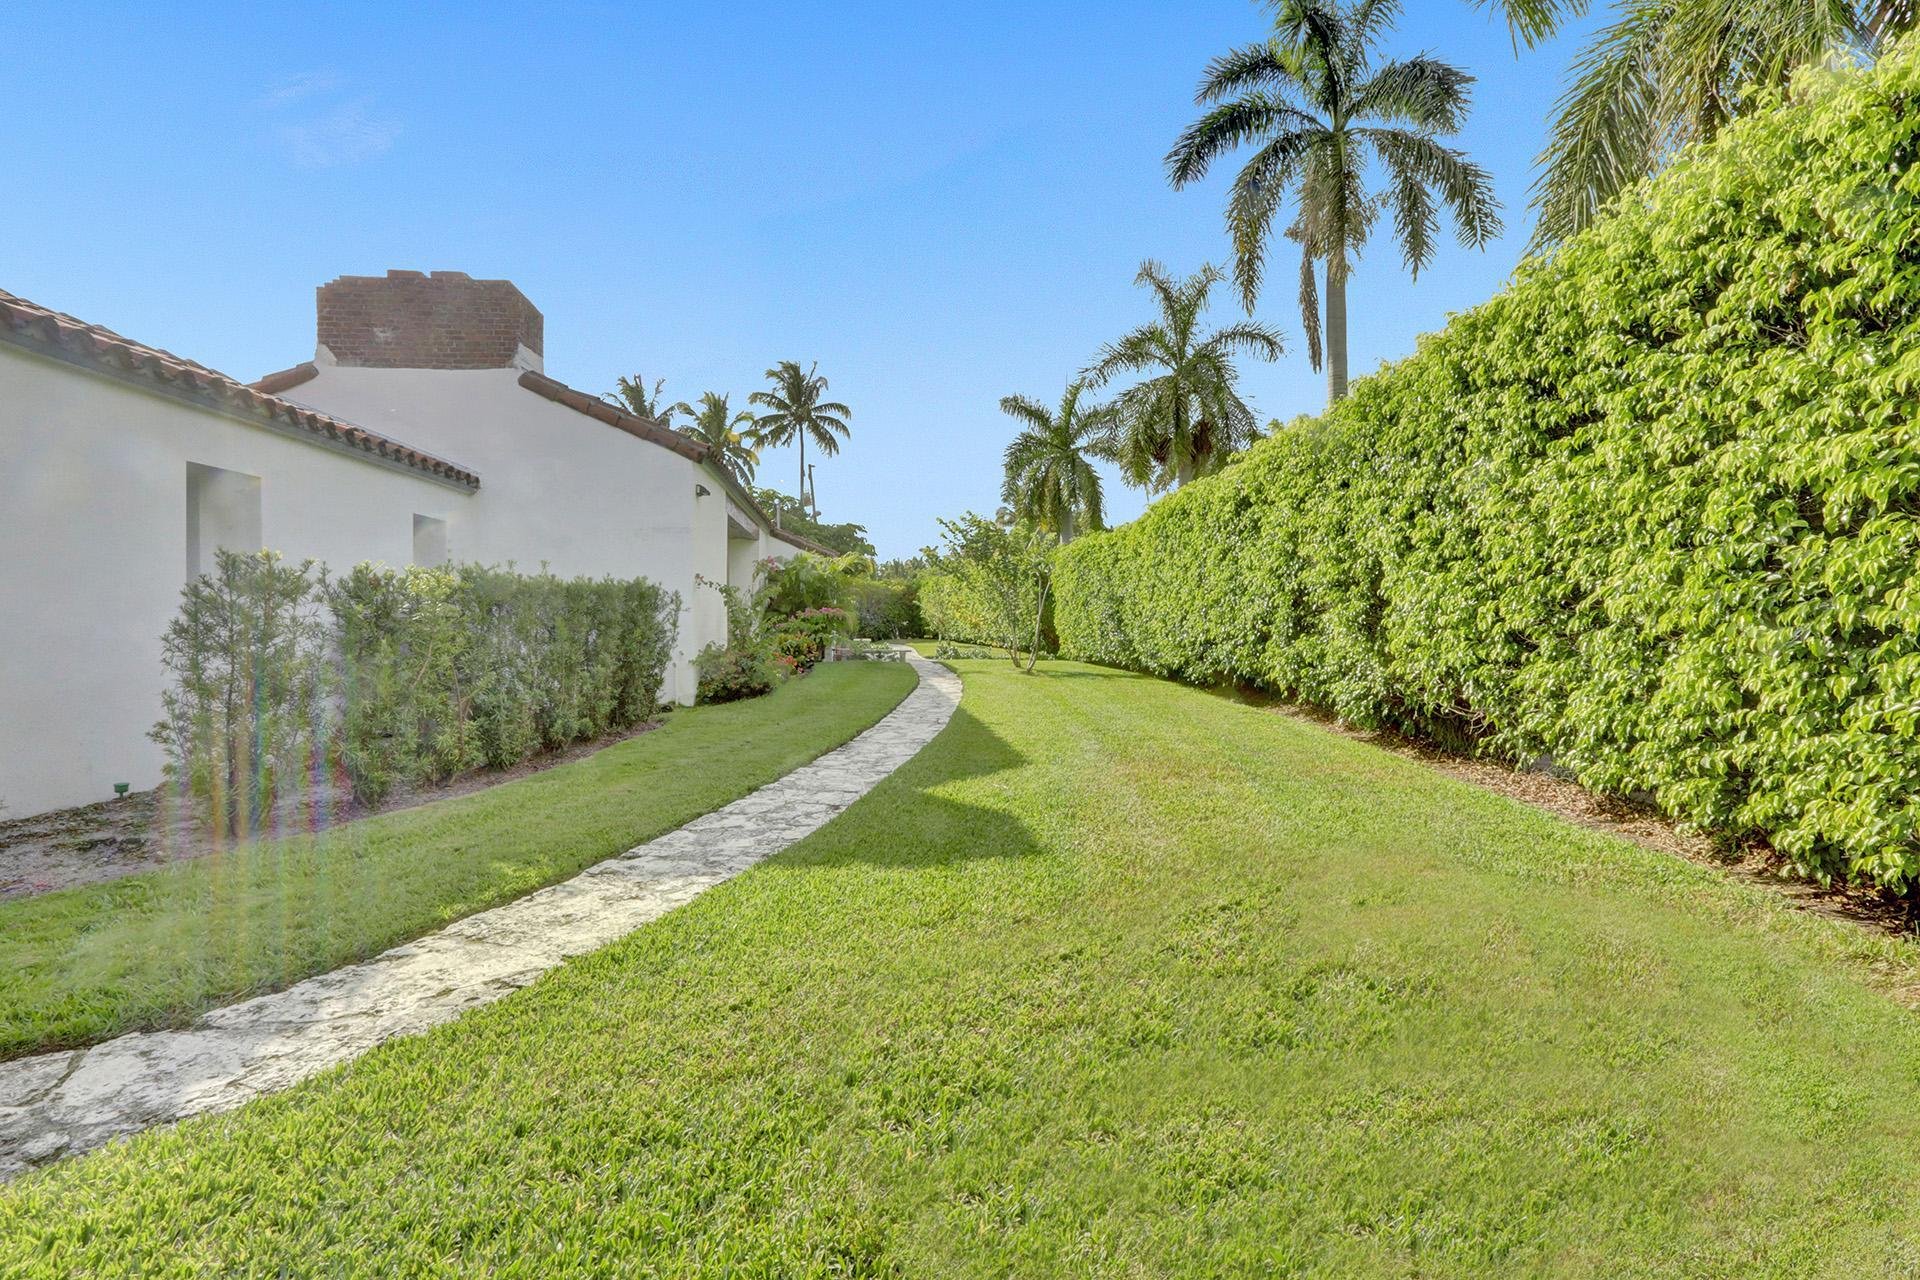 Check Out This Classic Miami Beach Mediterranean On Pine Tree Drive Asking $6.5 Million10.jpg